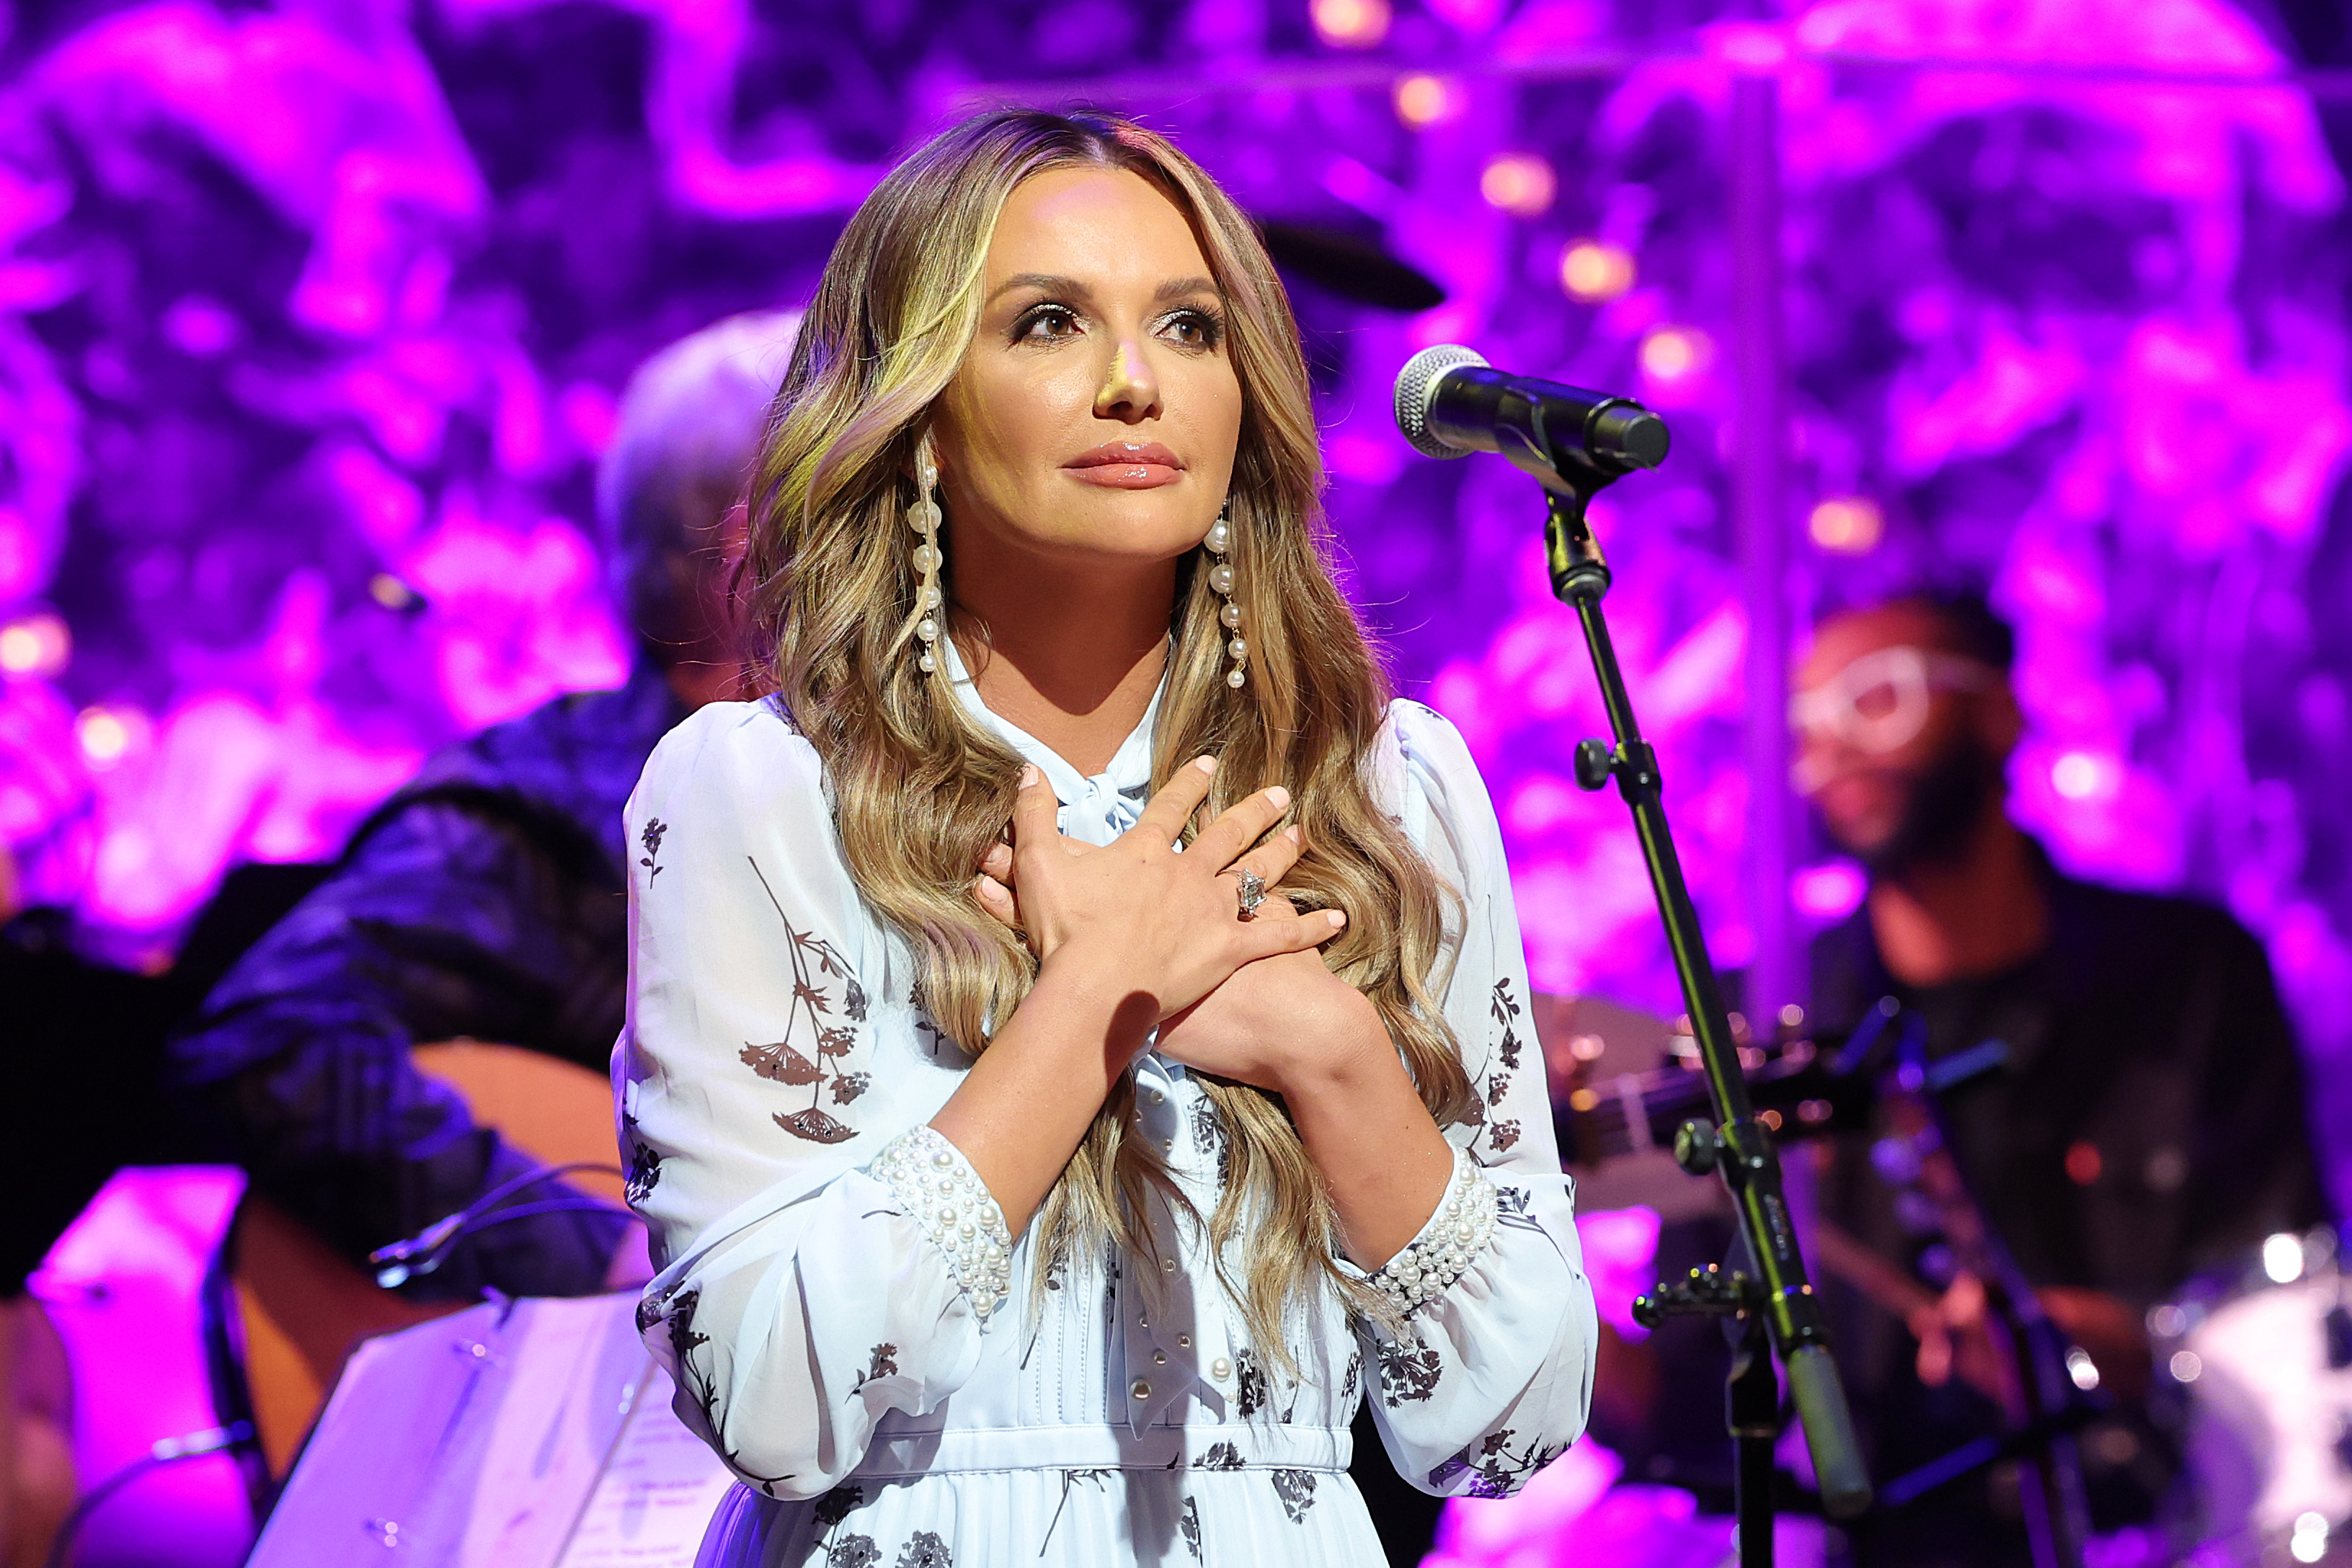 Carly Pearce, who performed in front of Wynonna Judd after Naomi Judd's death, for the class of 2021 medallion ceremony at Country Music Hall of Fame